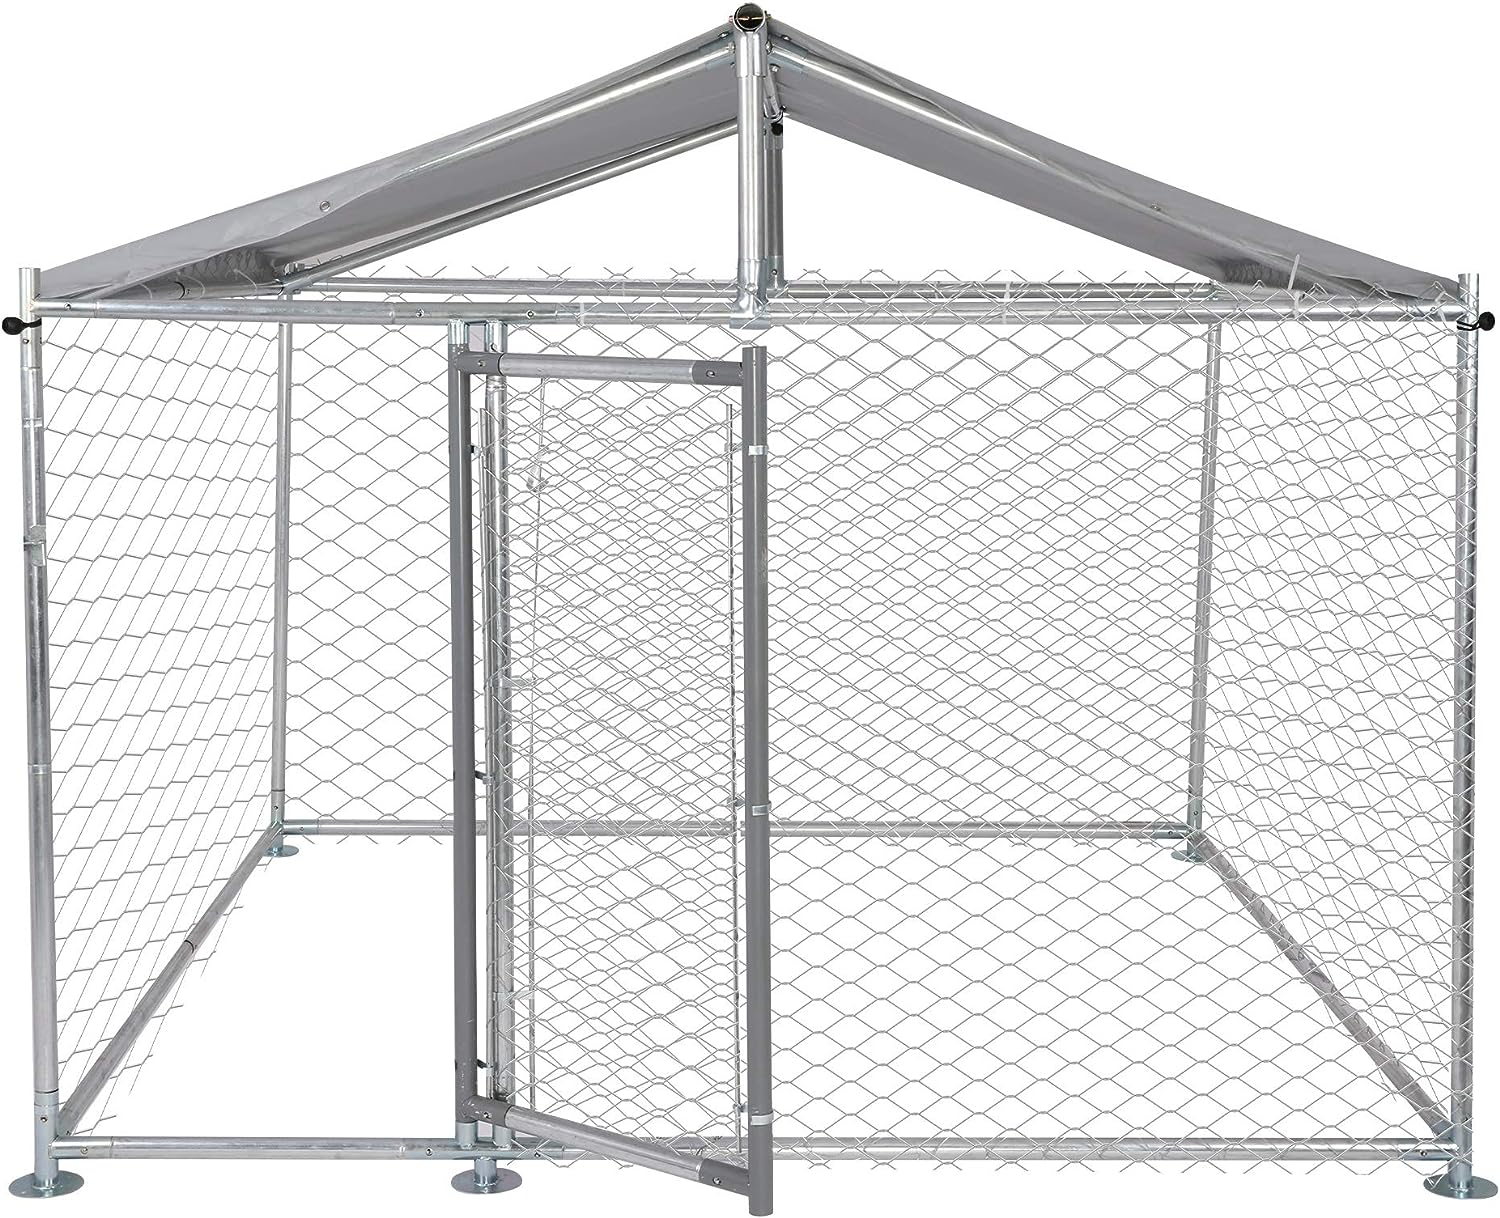 6.5'x6.5'x5' Outdoor Dog Kennel Galvanized Steel Pet Playpen with Waterproof Cover Secure Lock for Large Dog